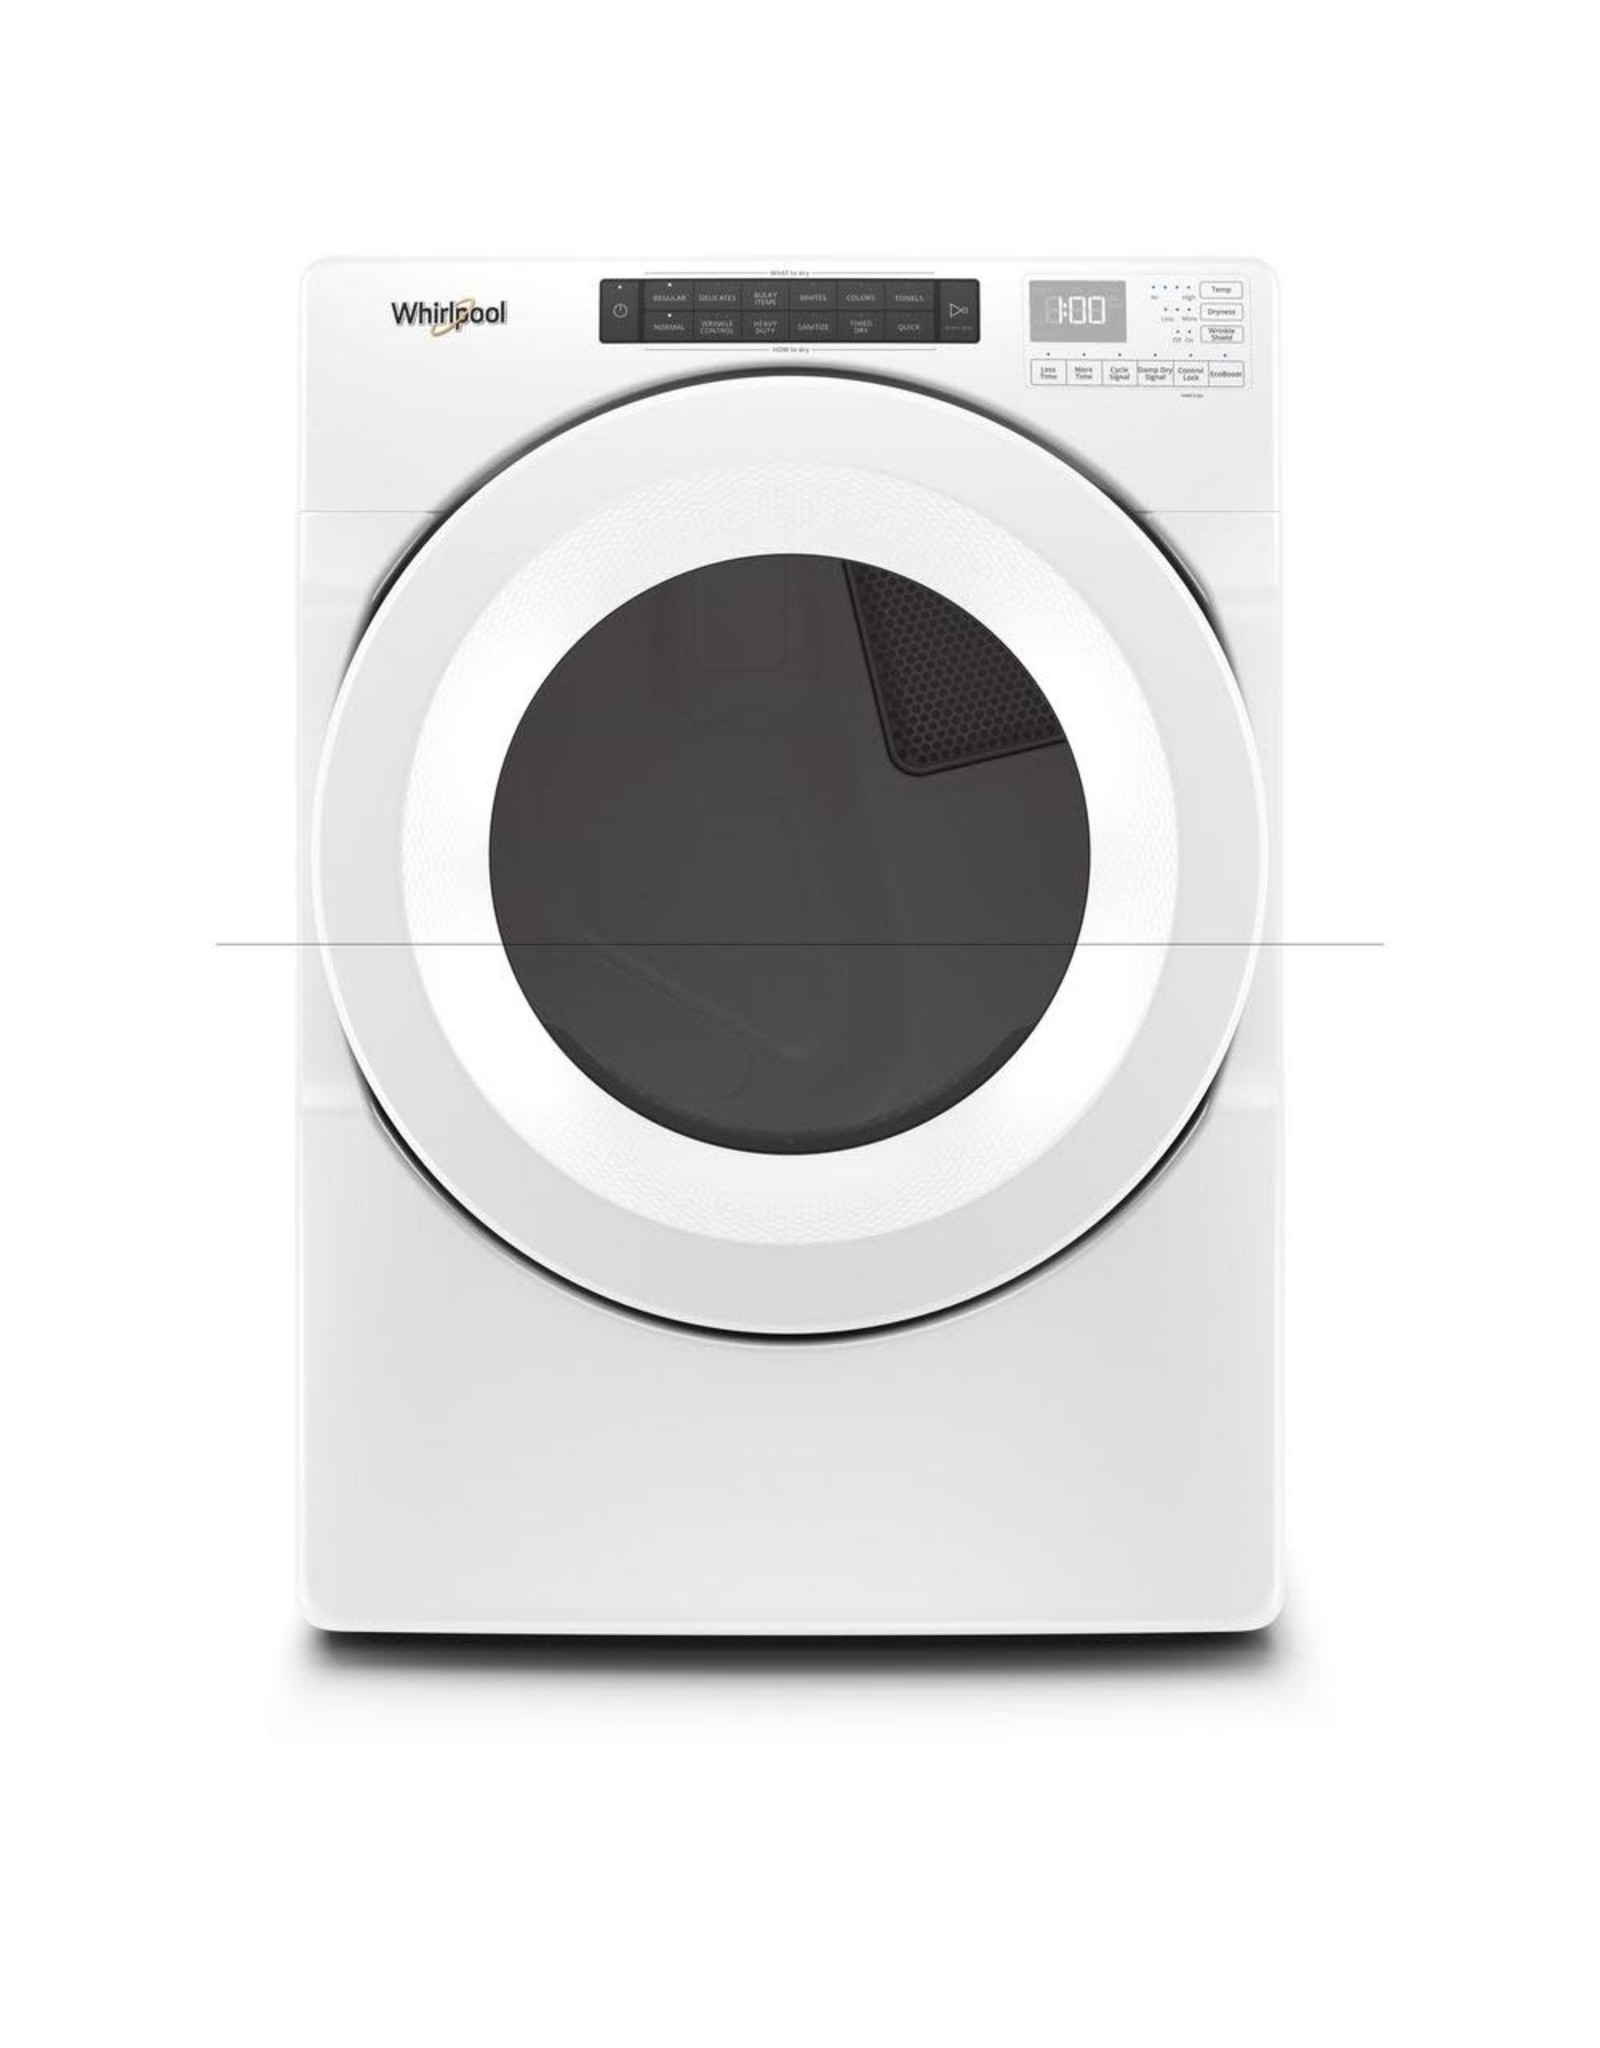 WED5620HW  240-Volt White Electric Dryer with Intuitive Touch Controls and Advanced Moisture Sensing, ENERGY STAR